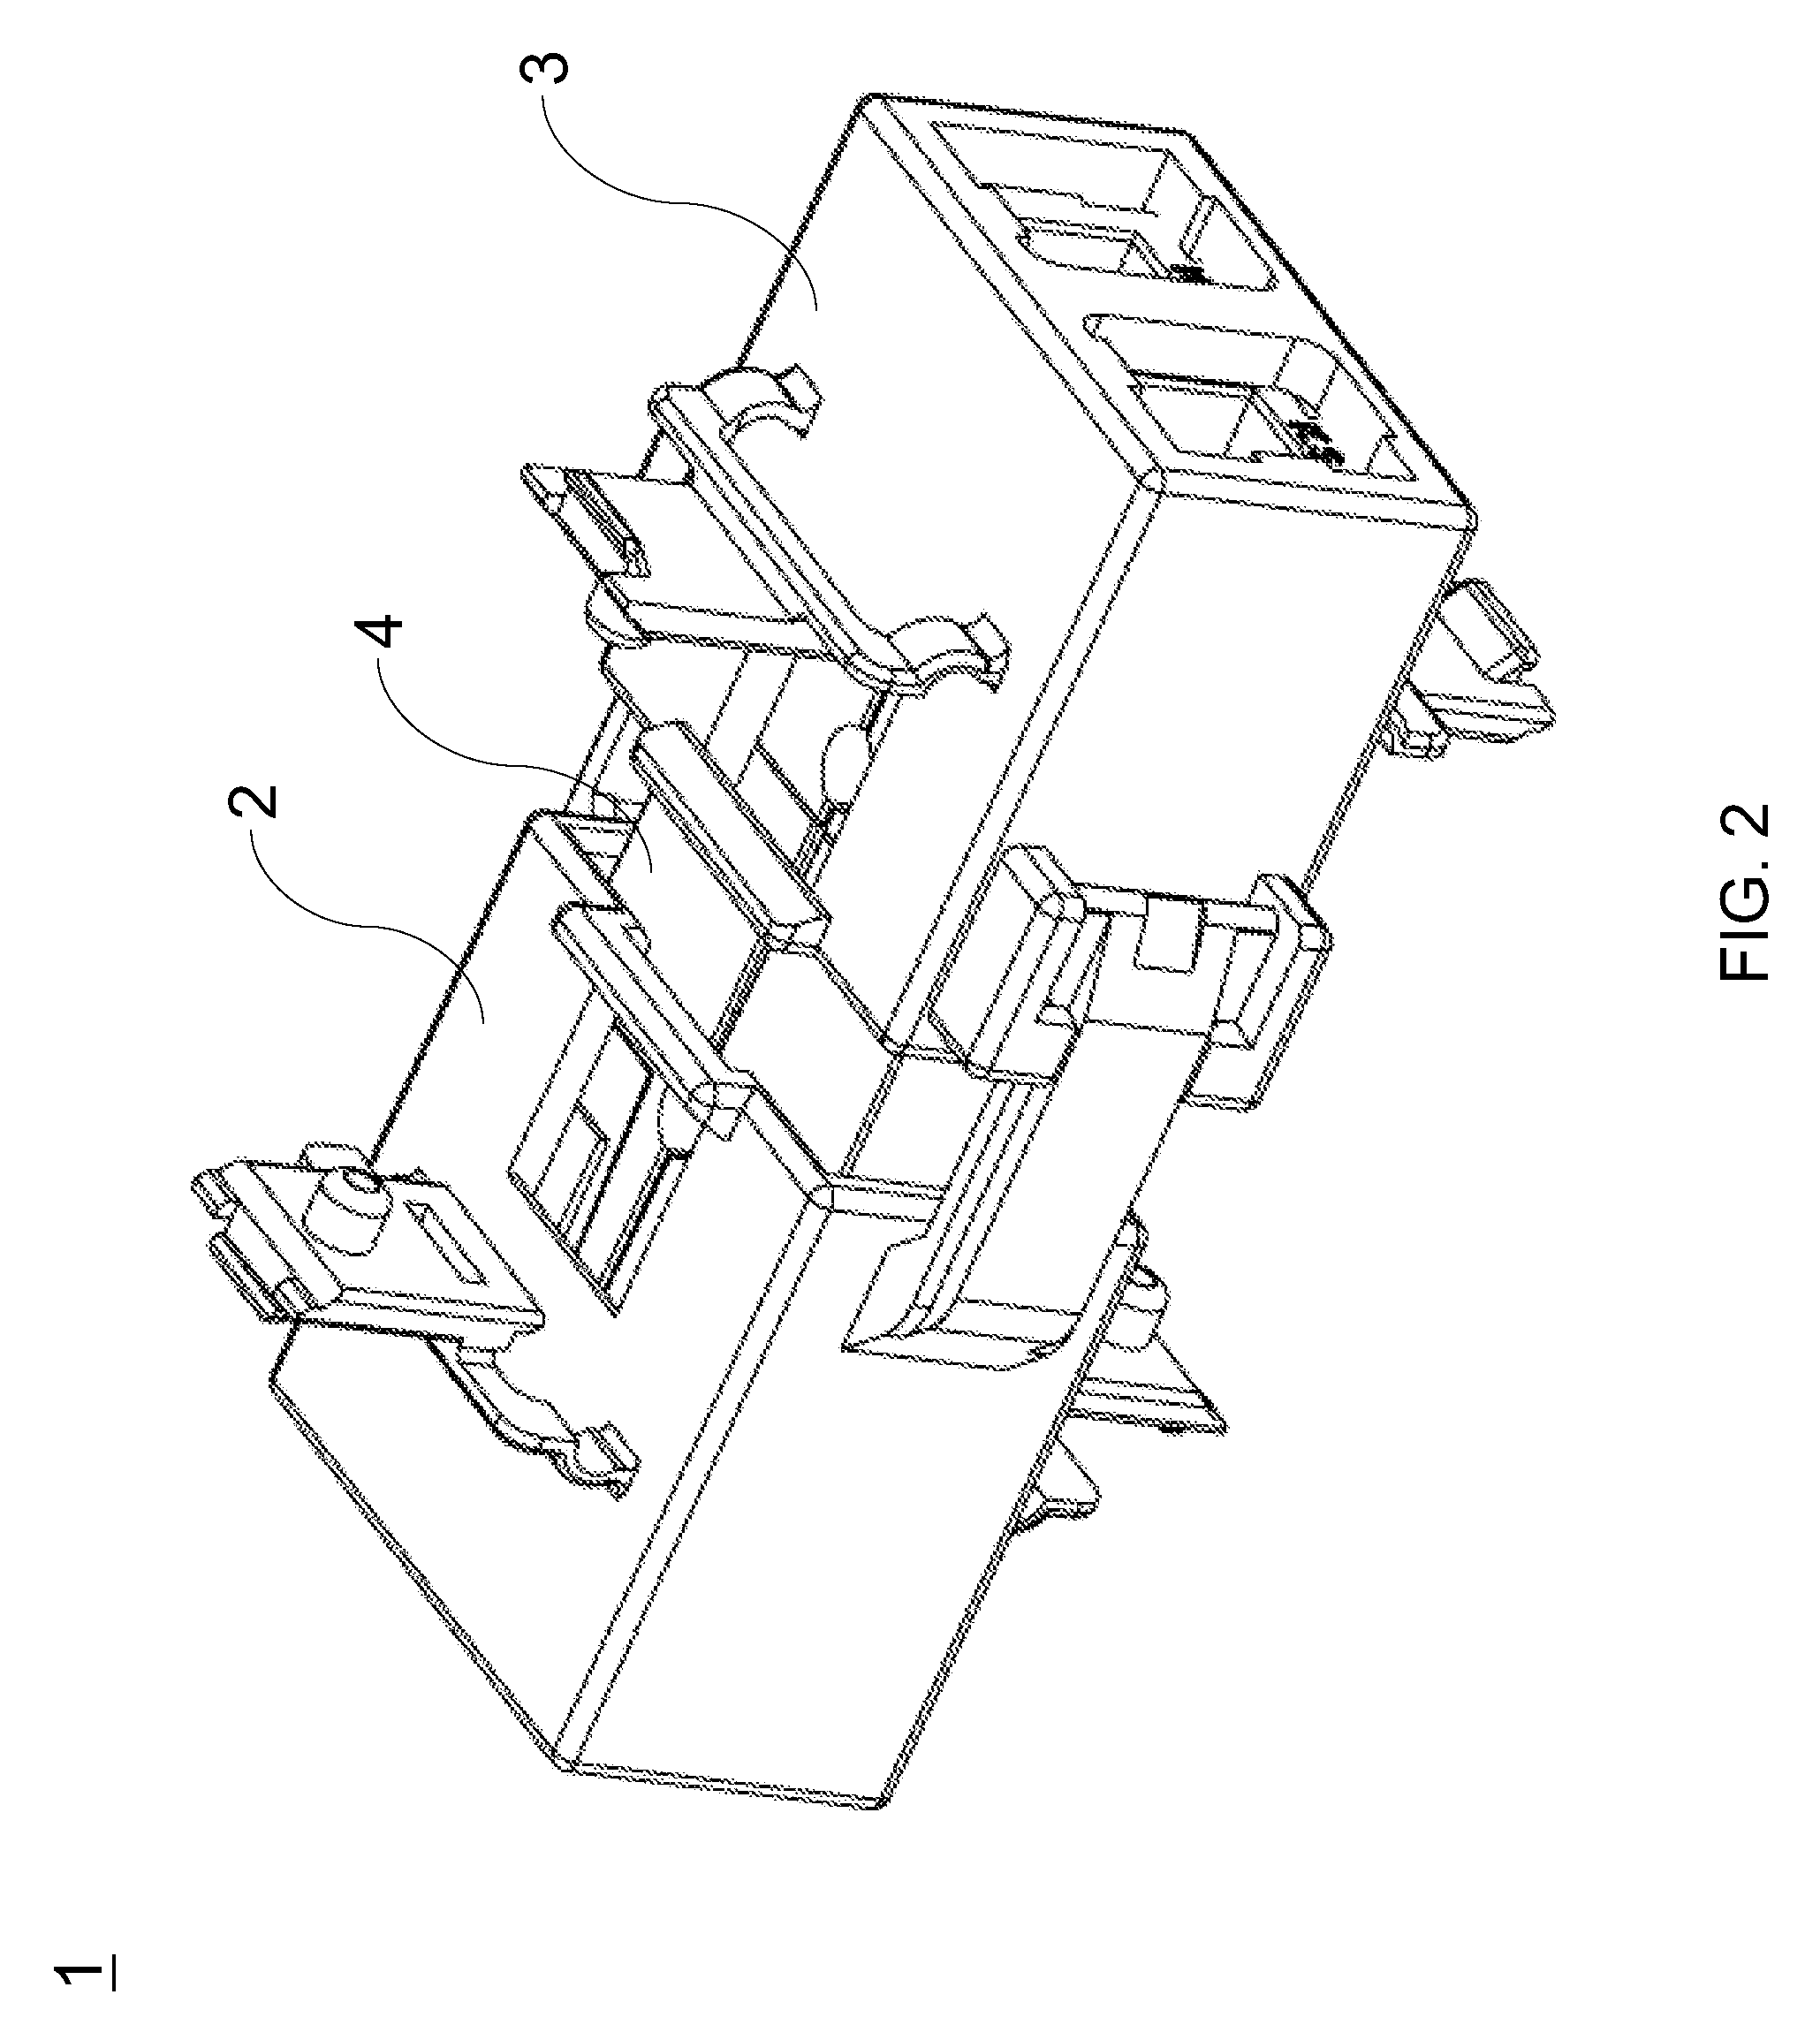 Latched connector assembly